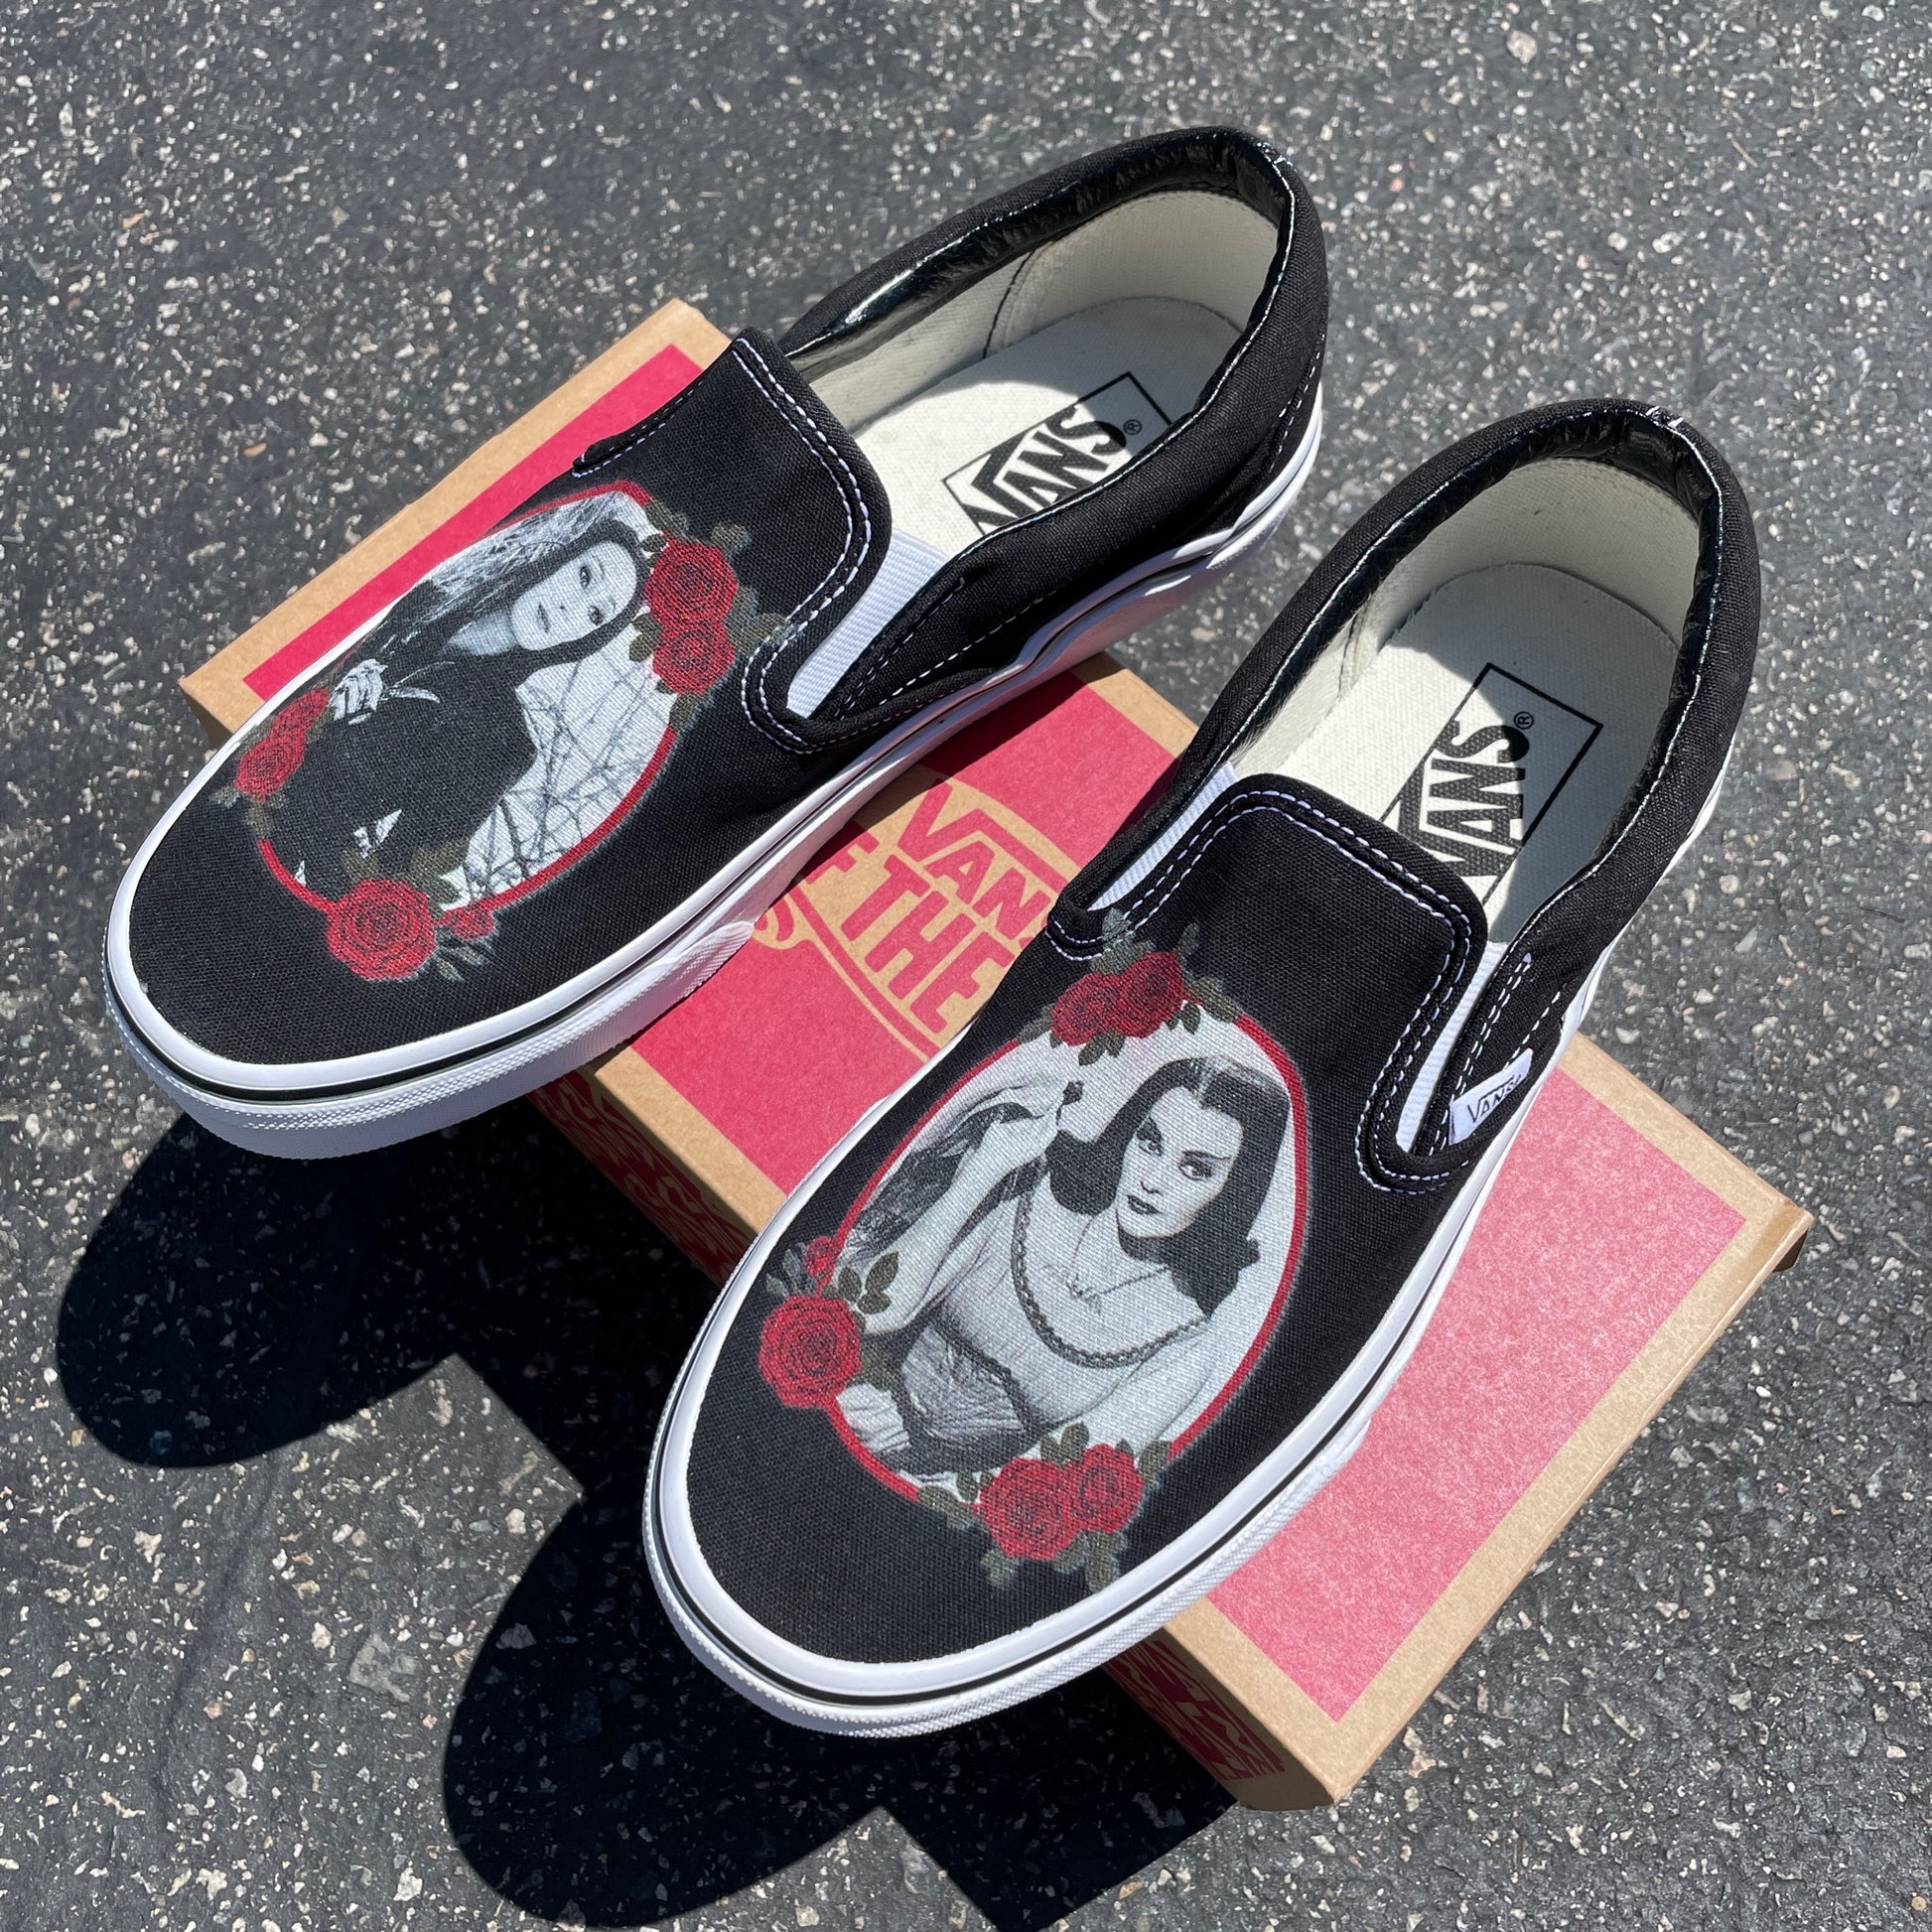 Goth Goddesses - Morticia Addams and Lily Munster Custom Vans